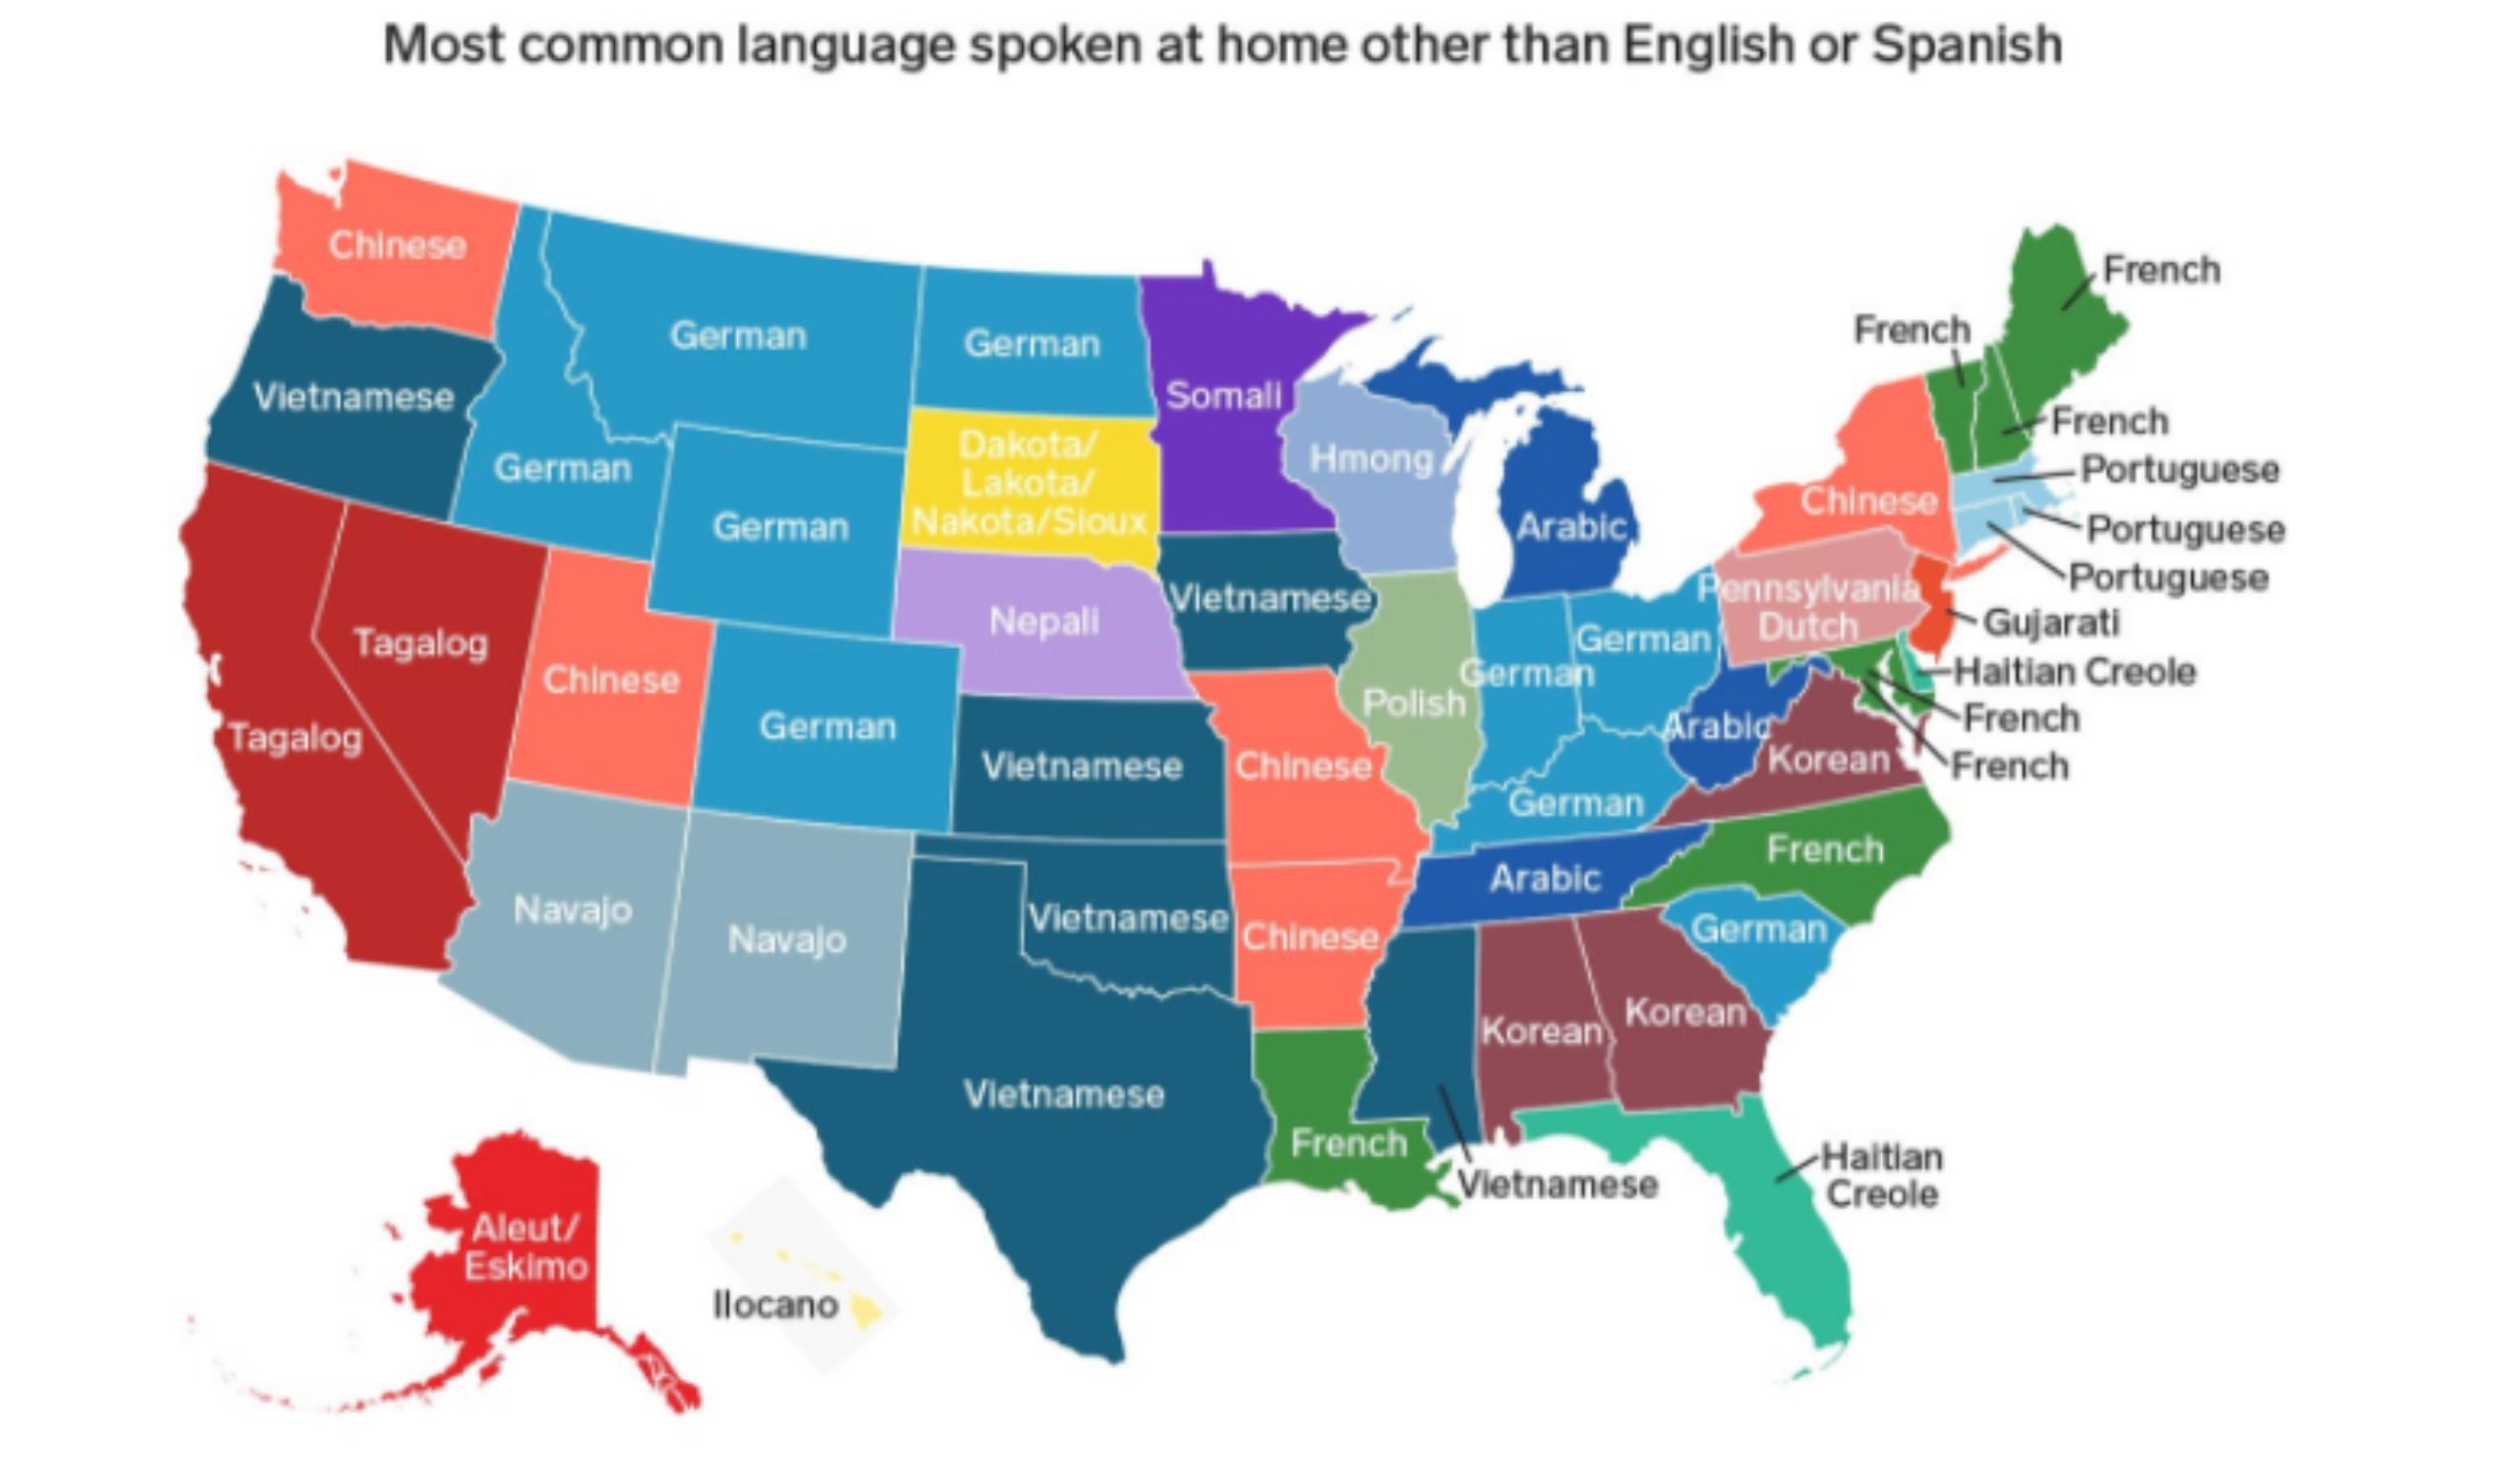 Most common language spoken at home other than English or Spanish